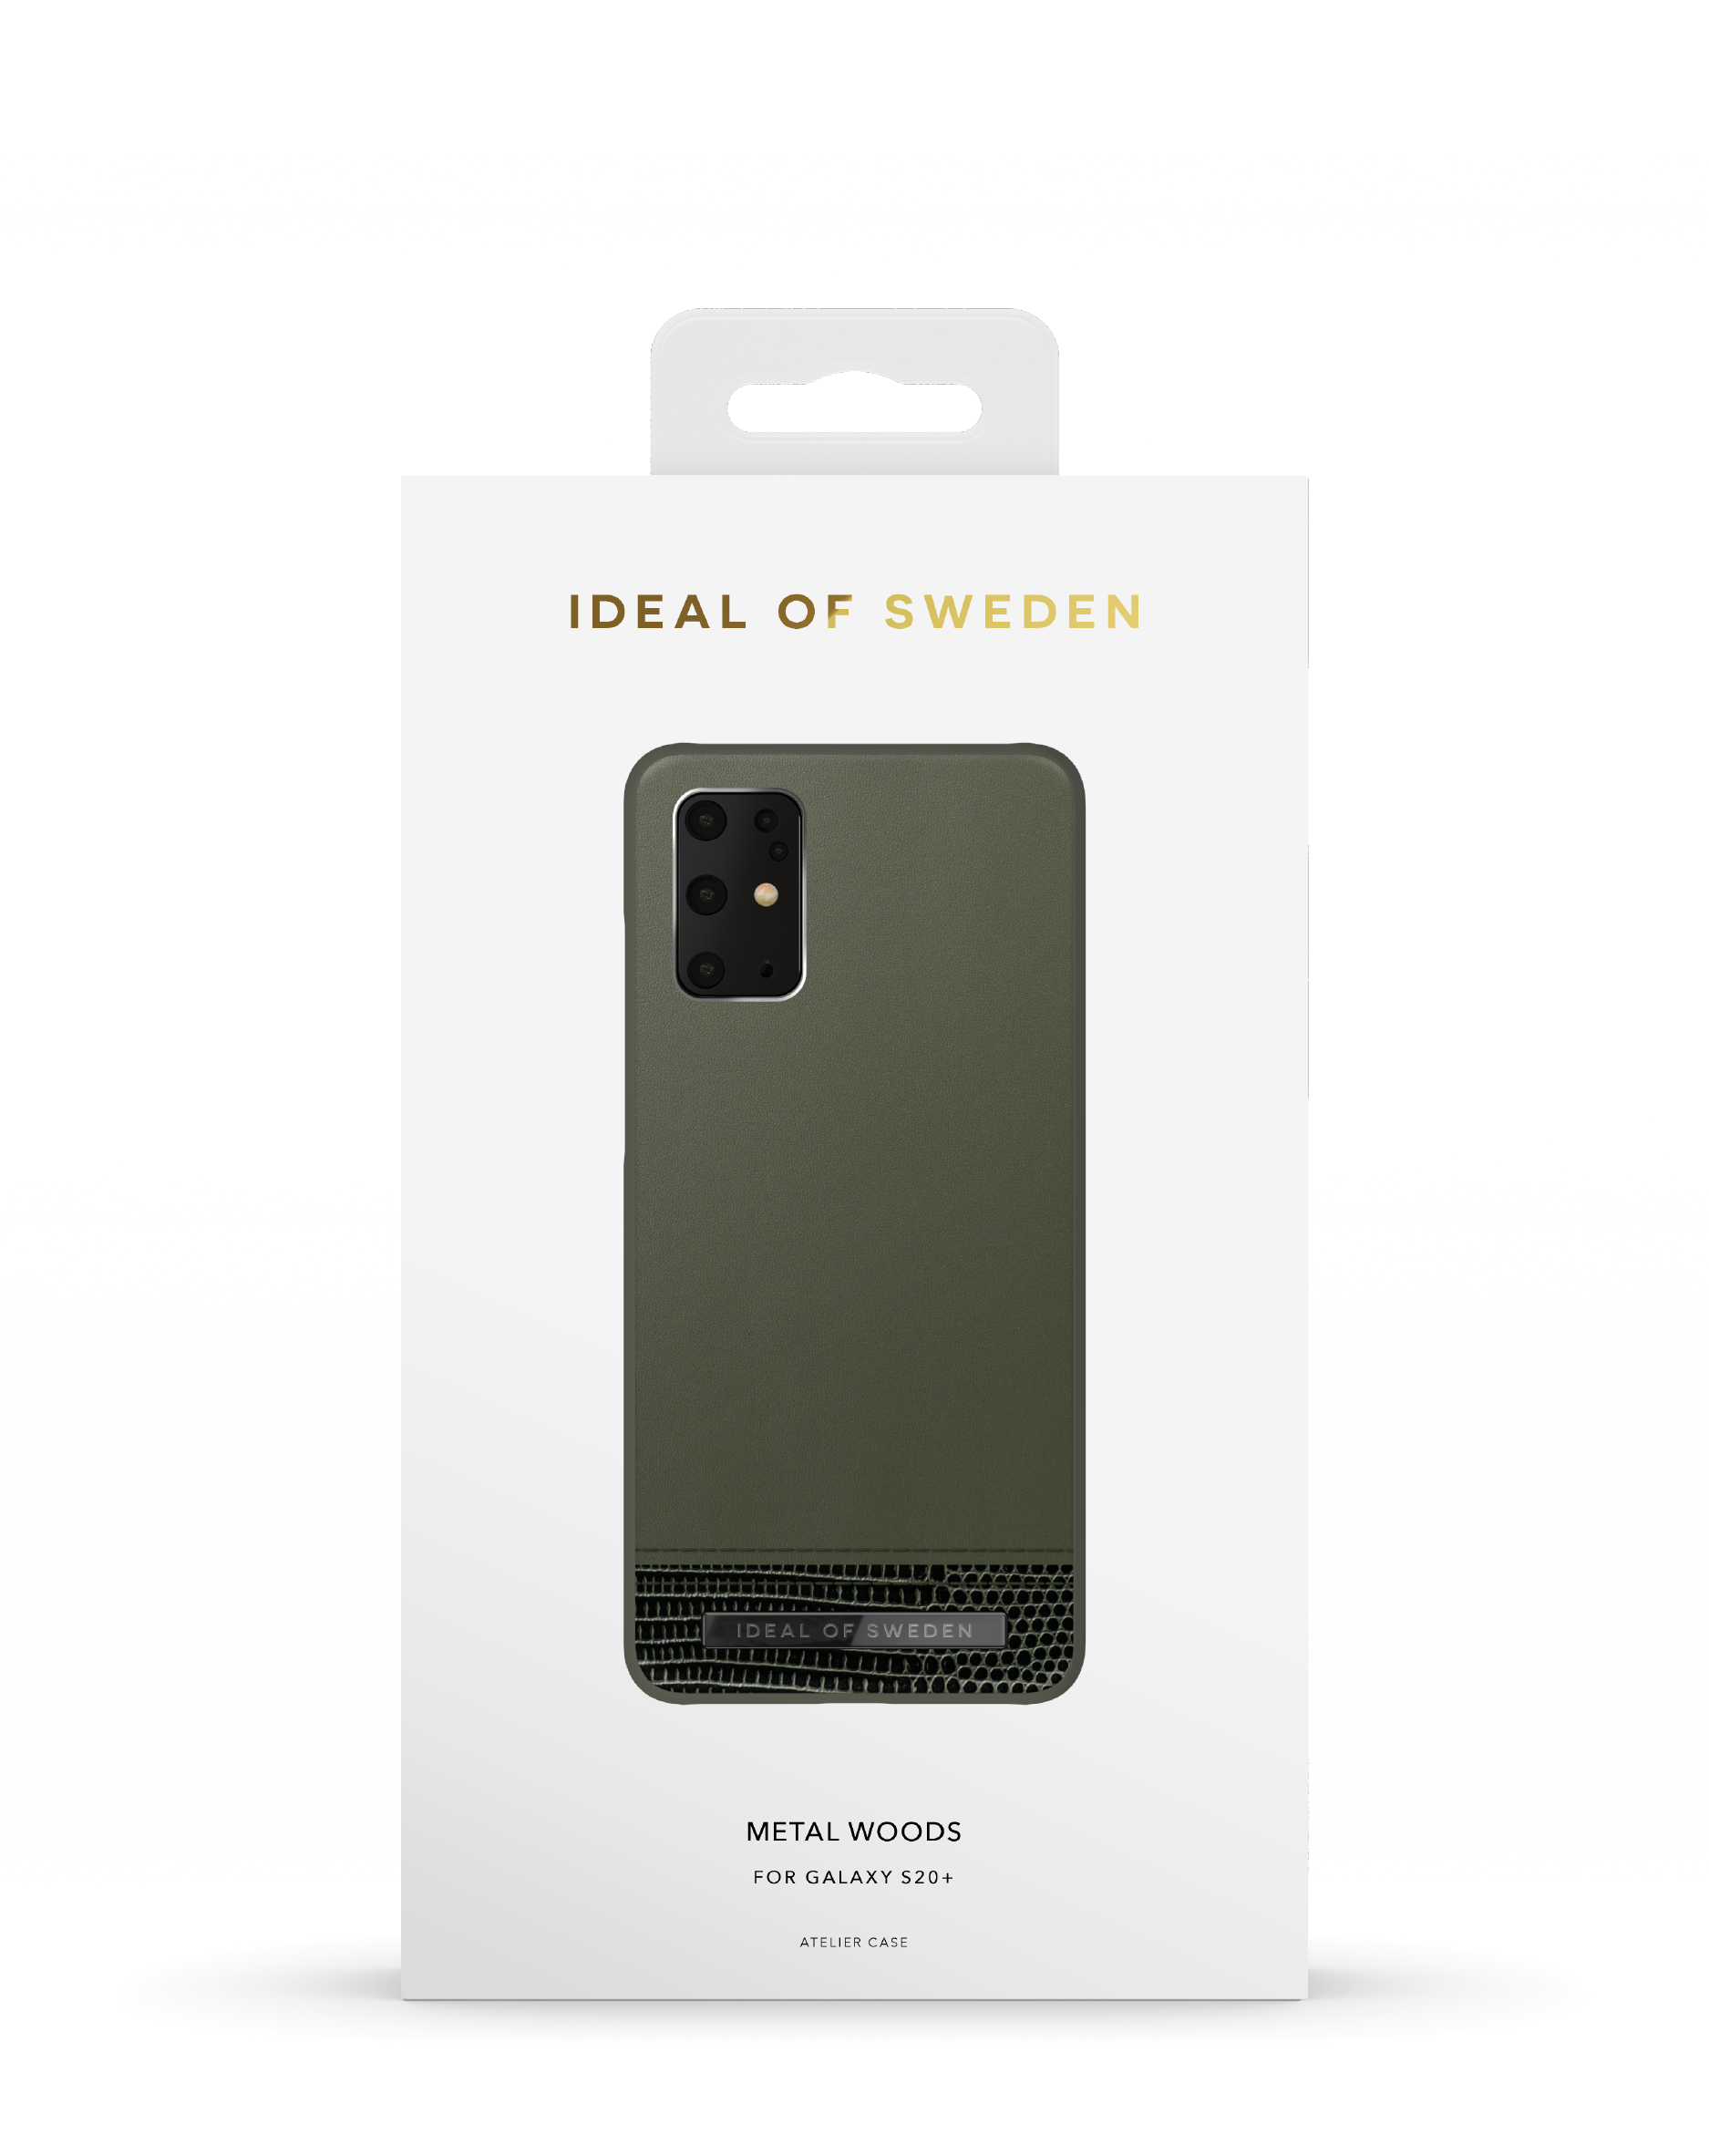 S20 IDEAL Ultra, IDACAW20-S11P-235, Galaxy Backcover, Samsung, Woods SWEDEN OF Metal